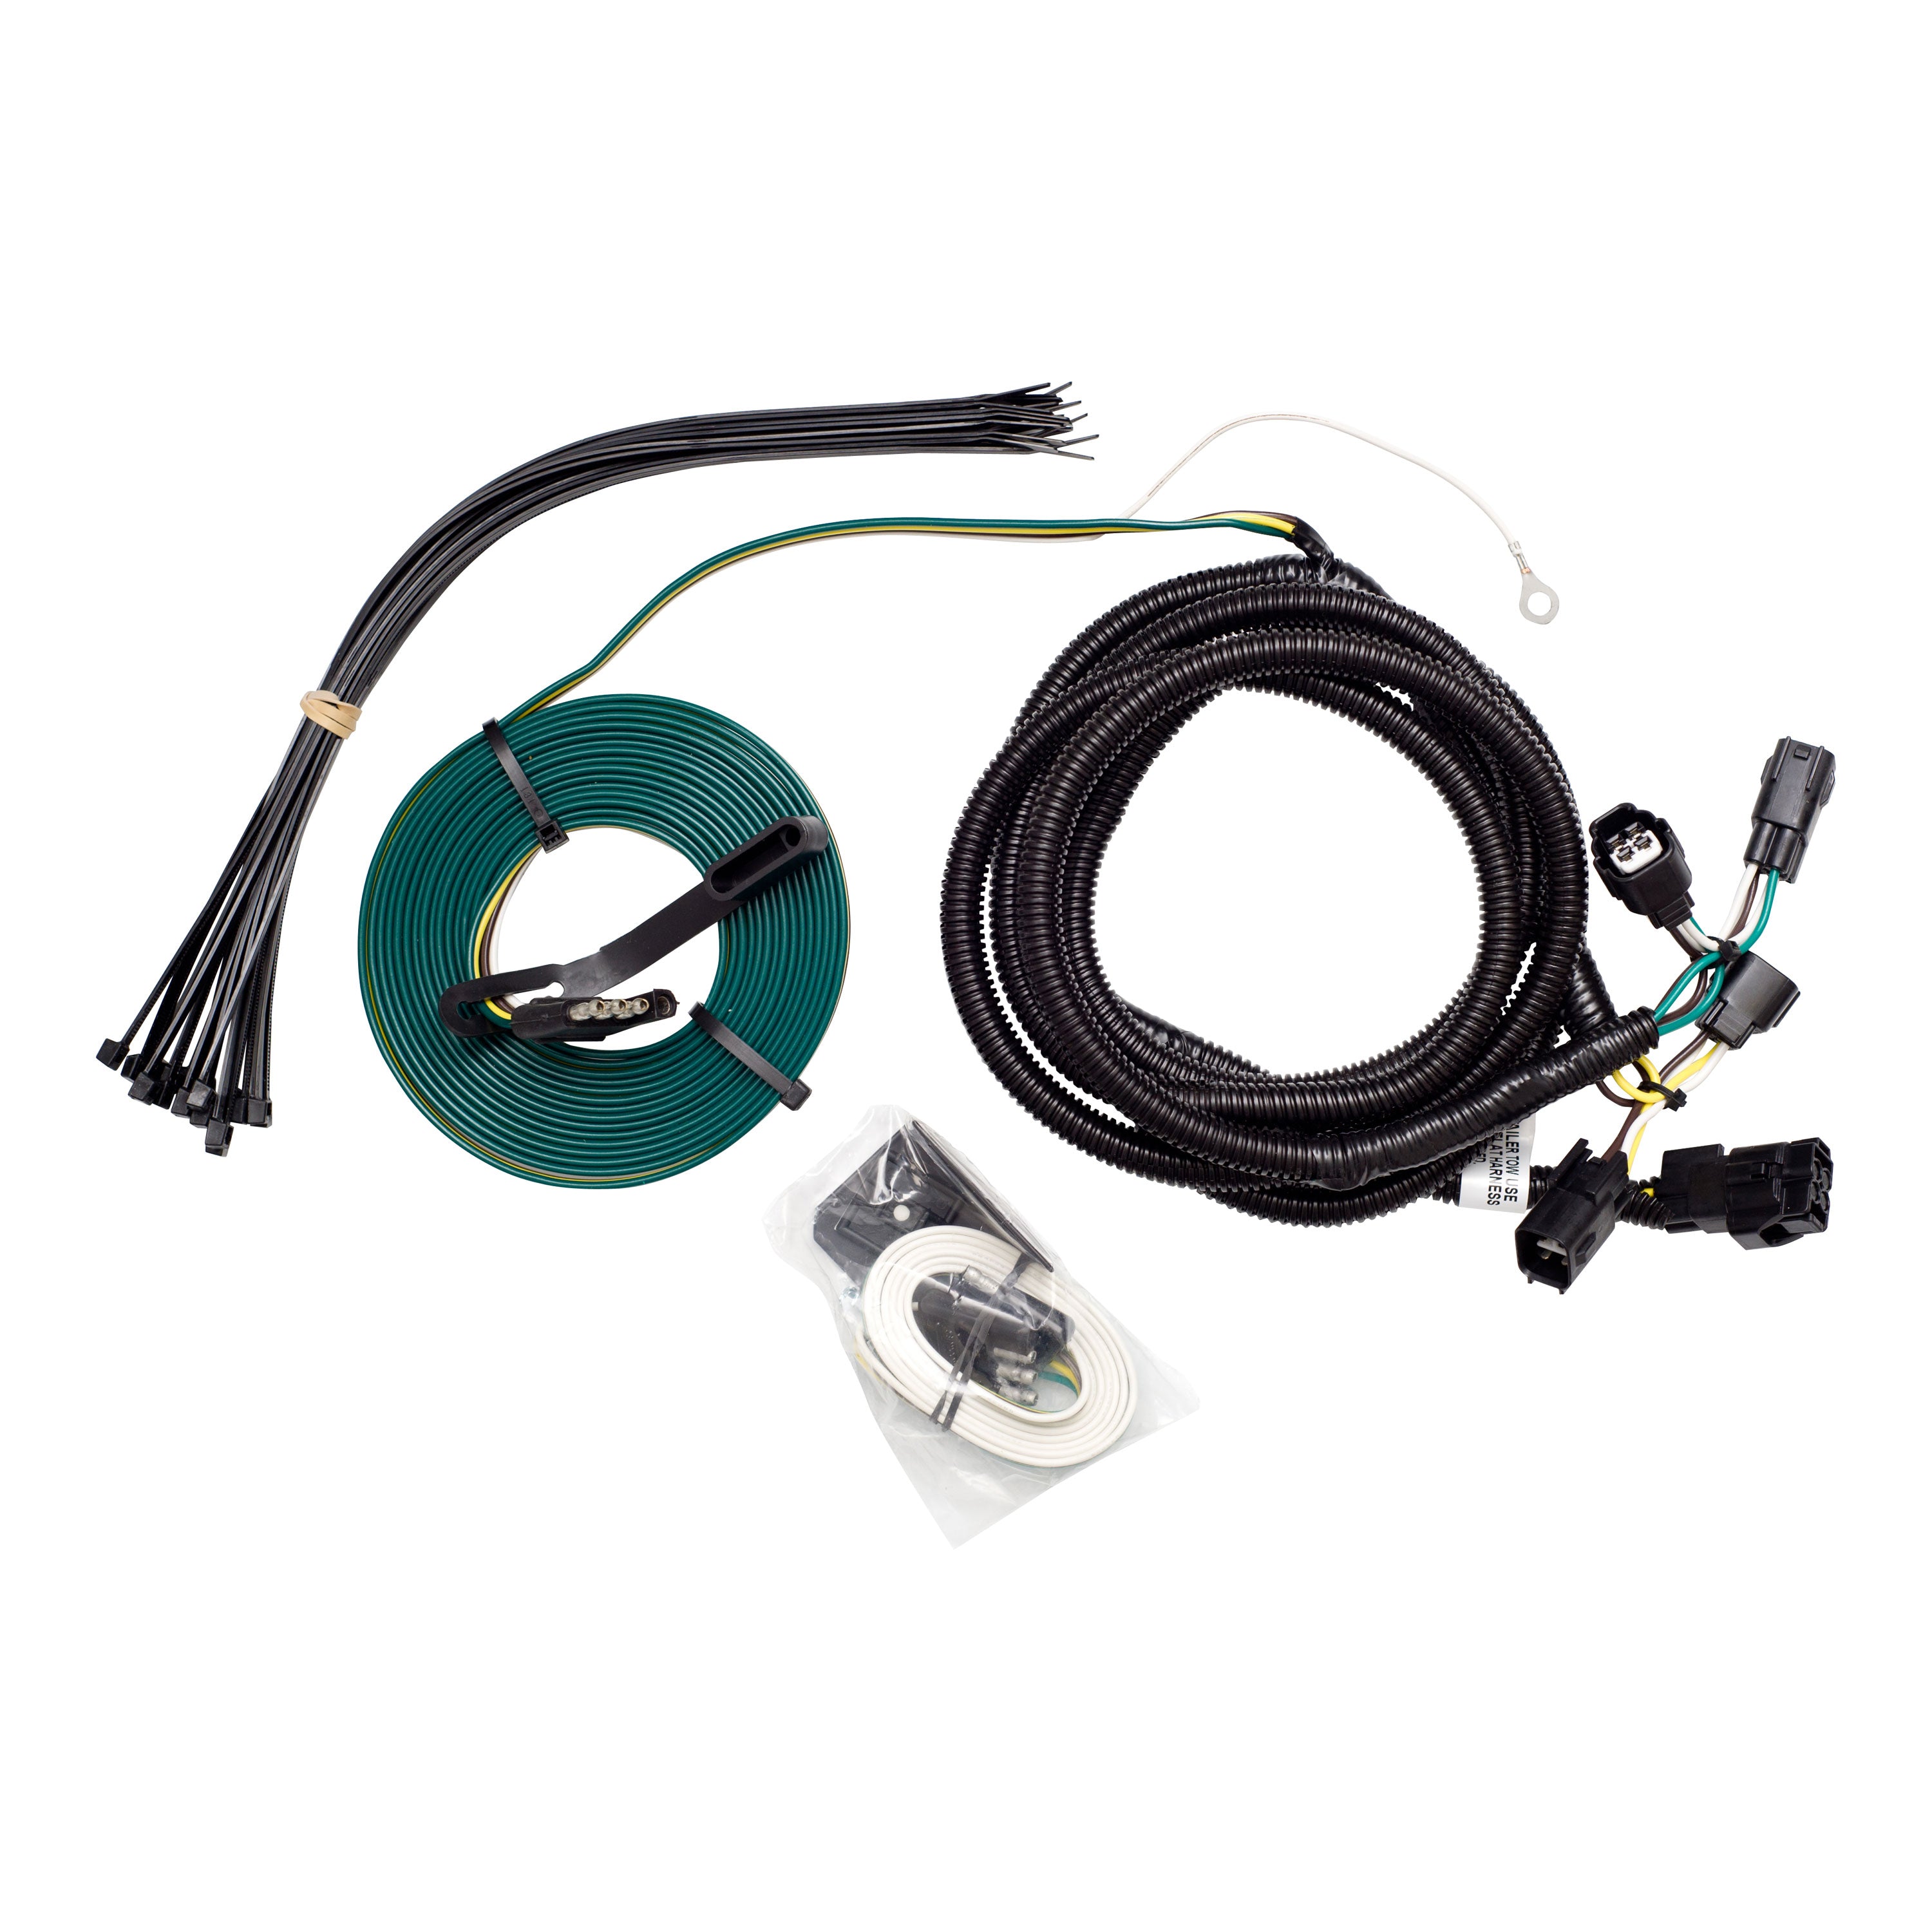 Demco 9523139 Towed Connector Vehicle Wiring Kit for Ford Focus HB '12-'14